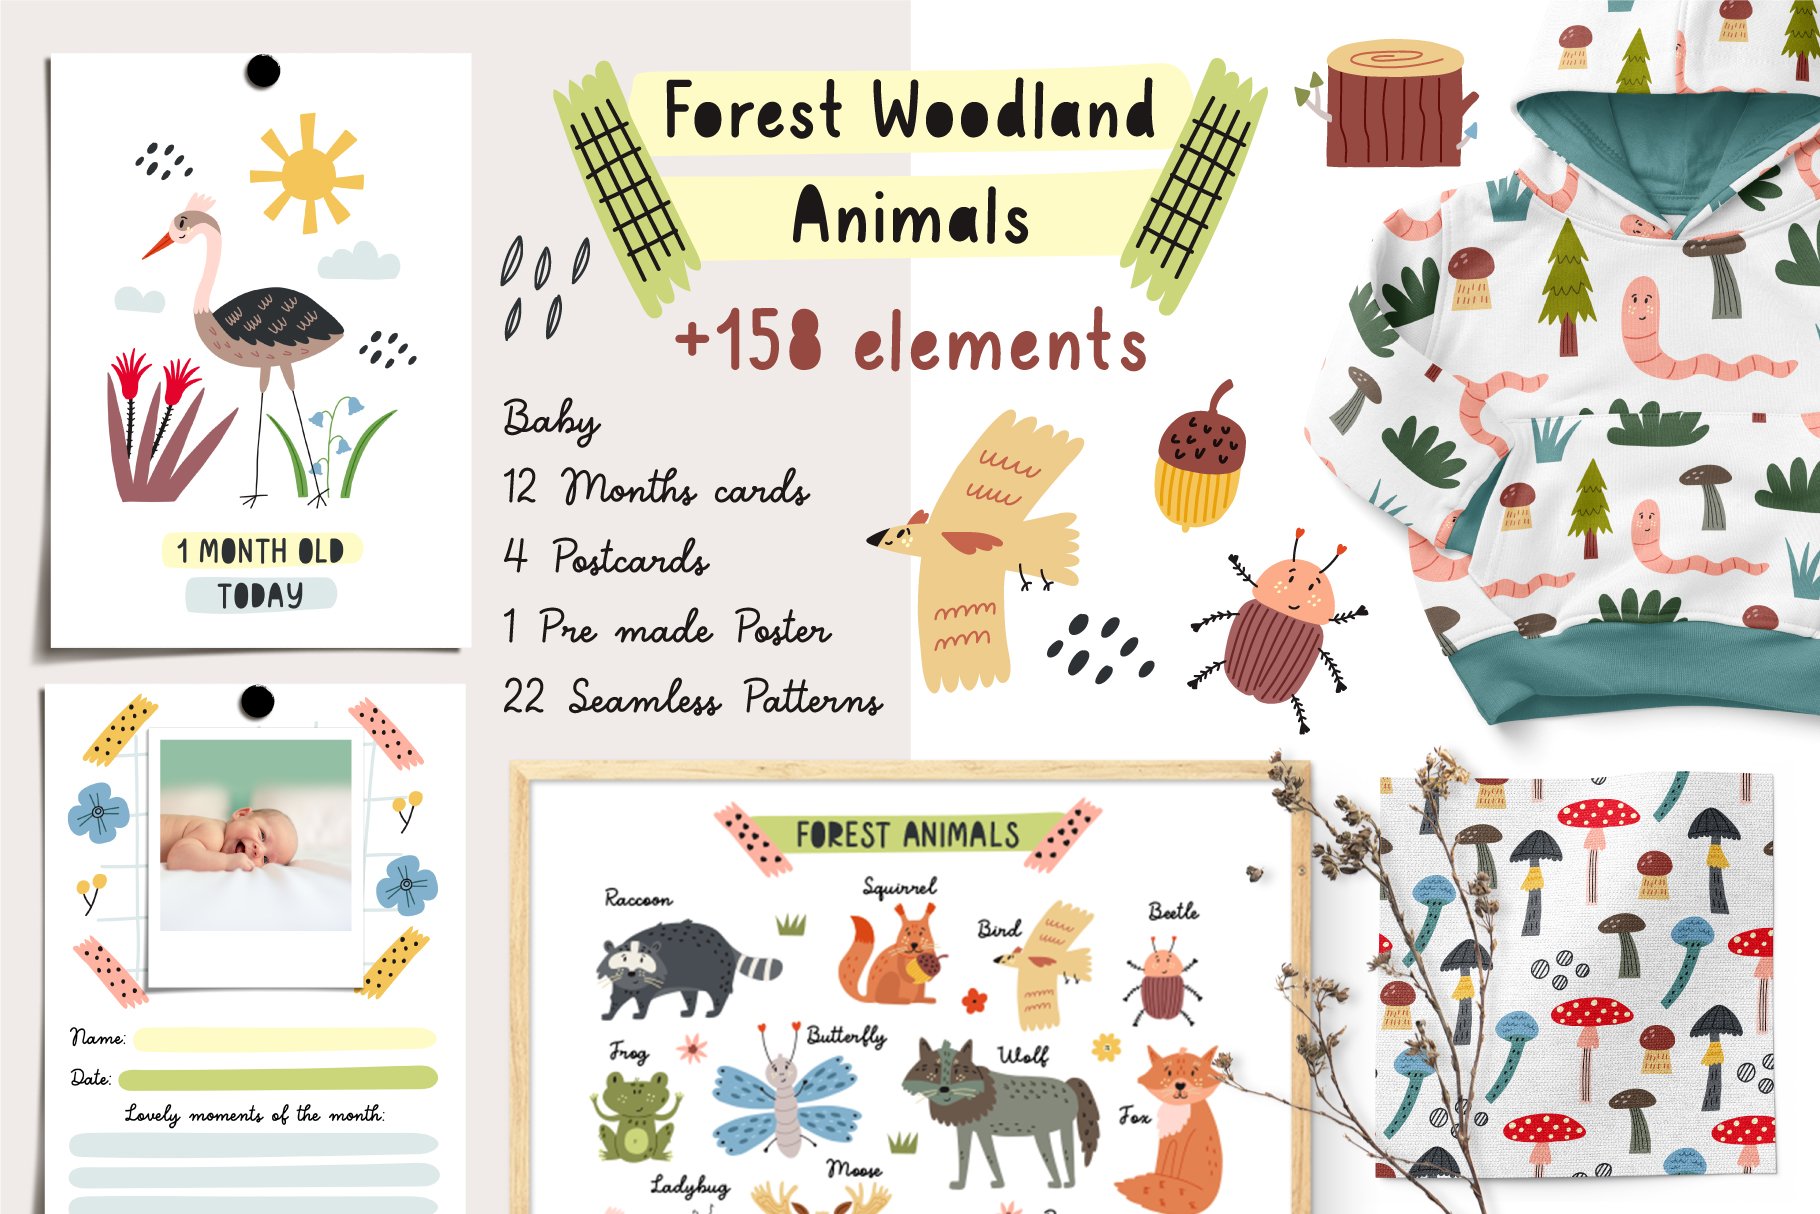 Forest Woodland Animals cover image.